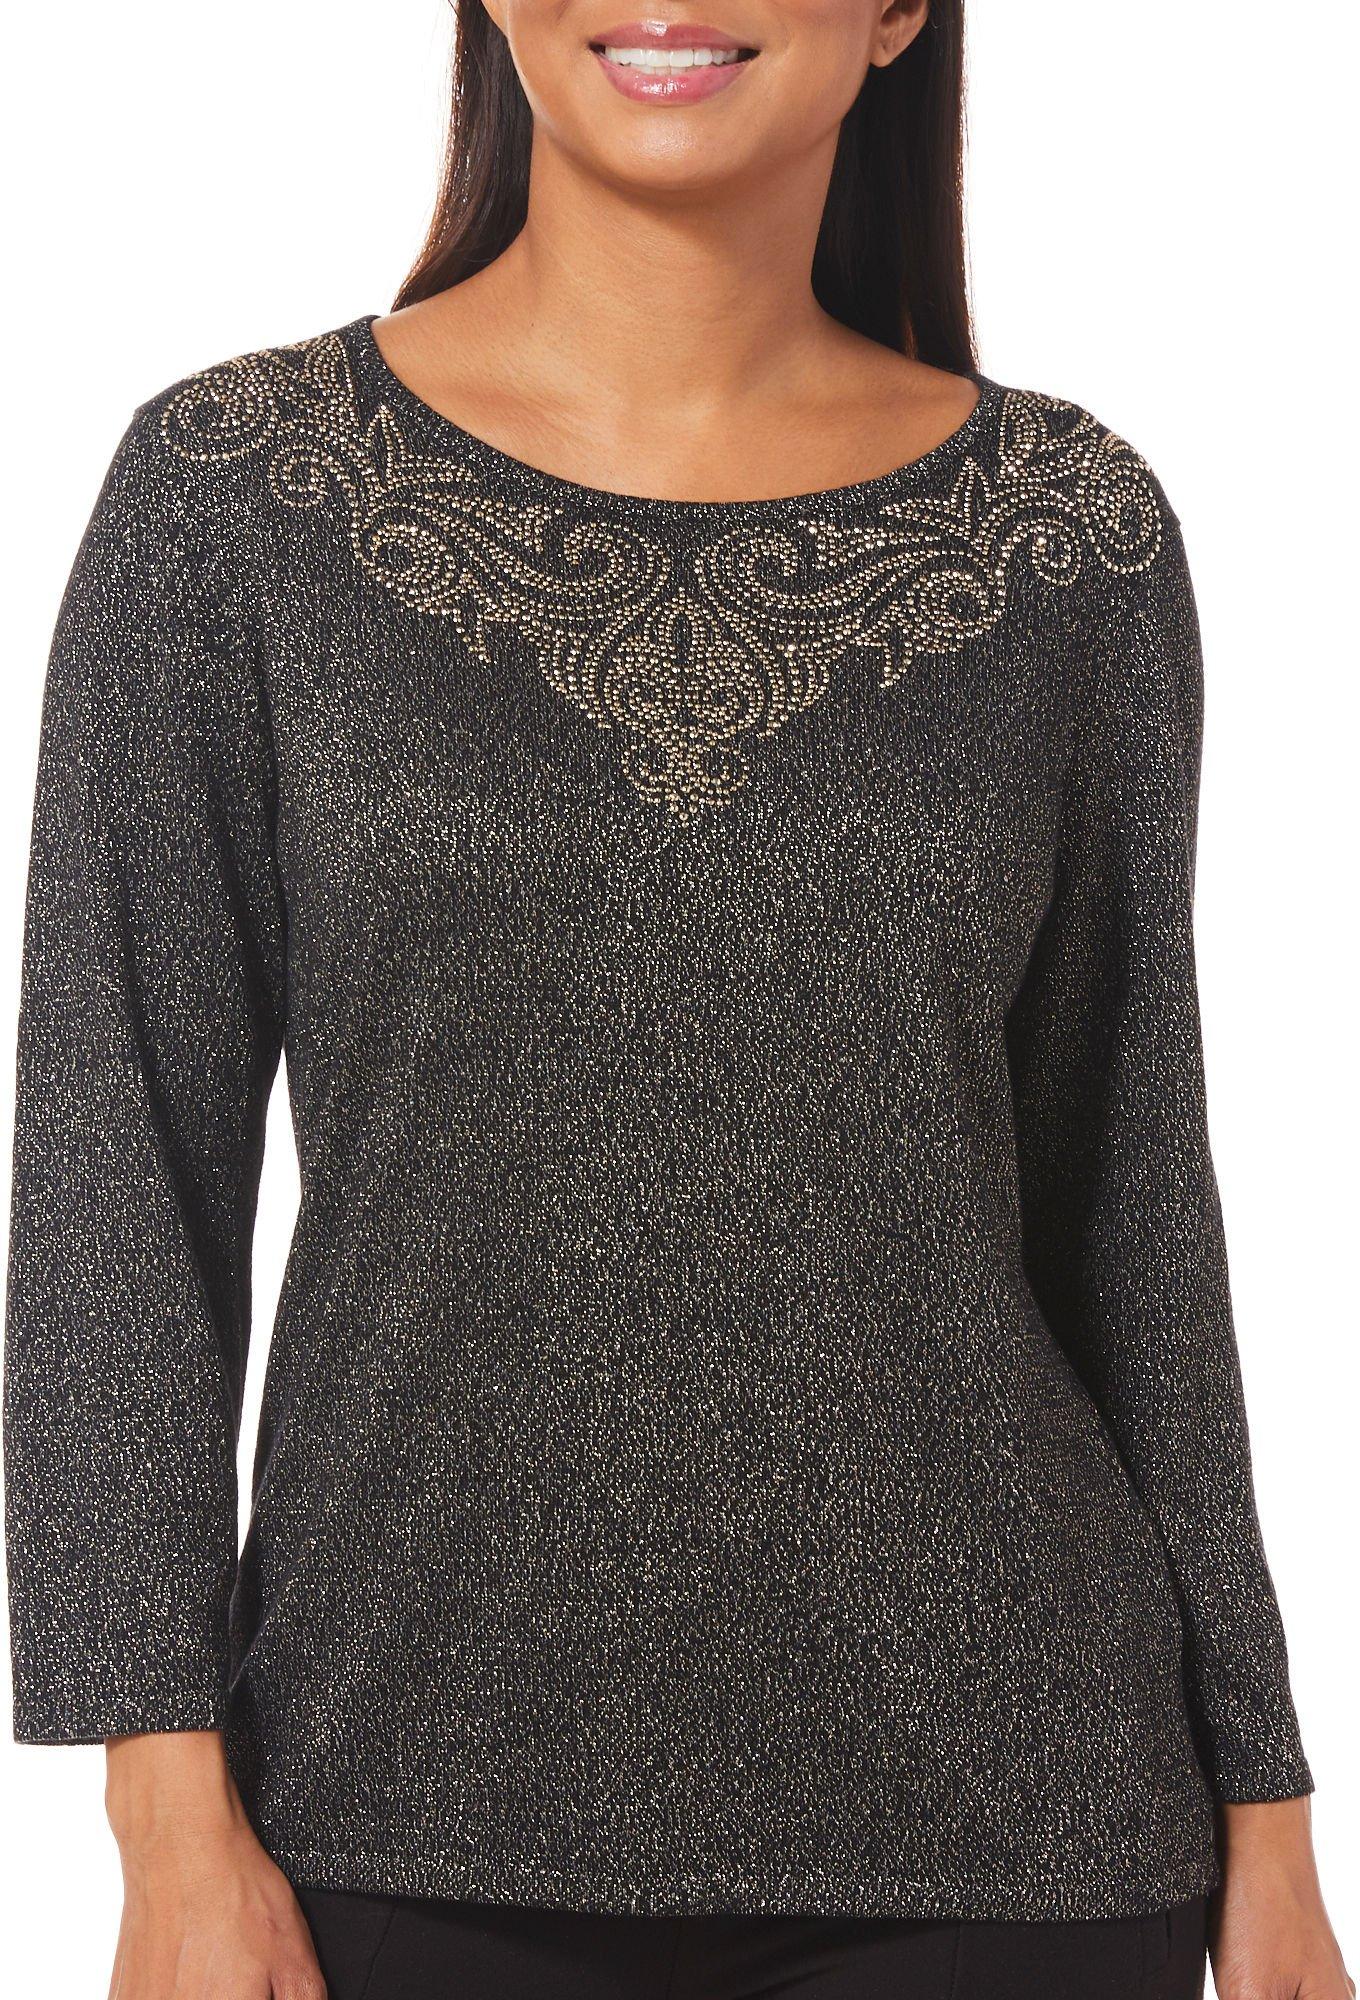 Sweaters for Women | Women's Sweaters | Bealls Florida